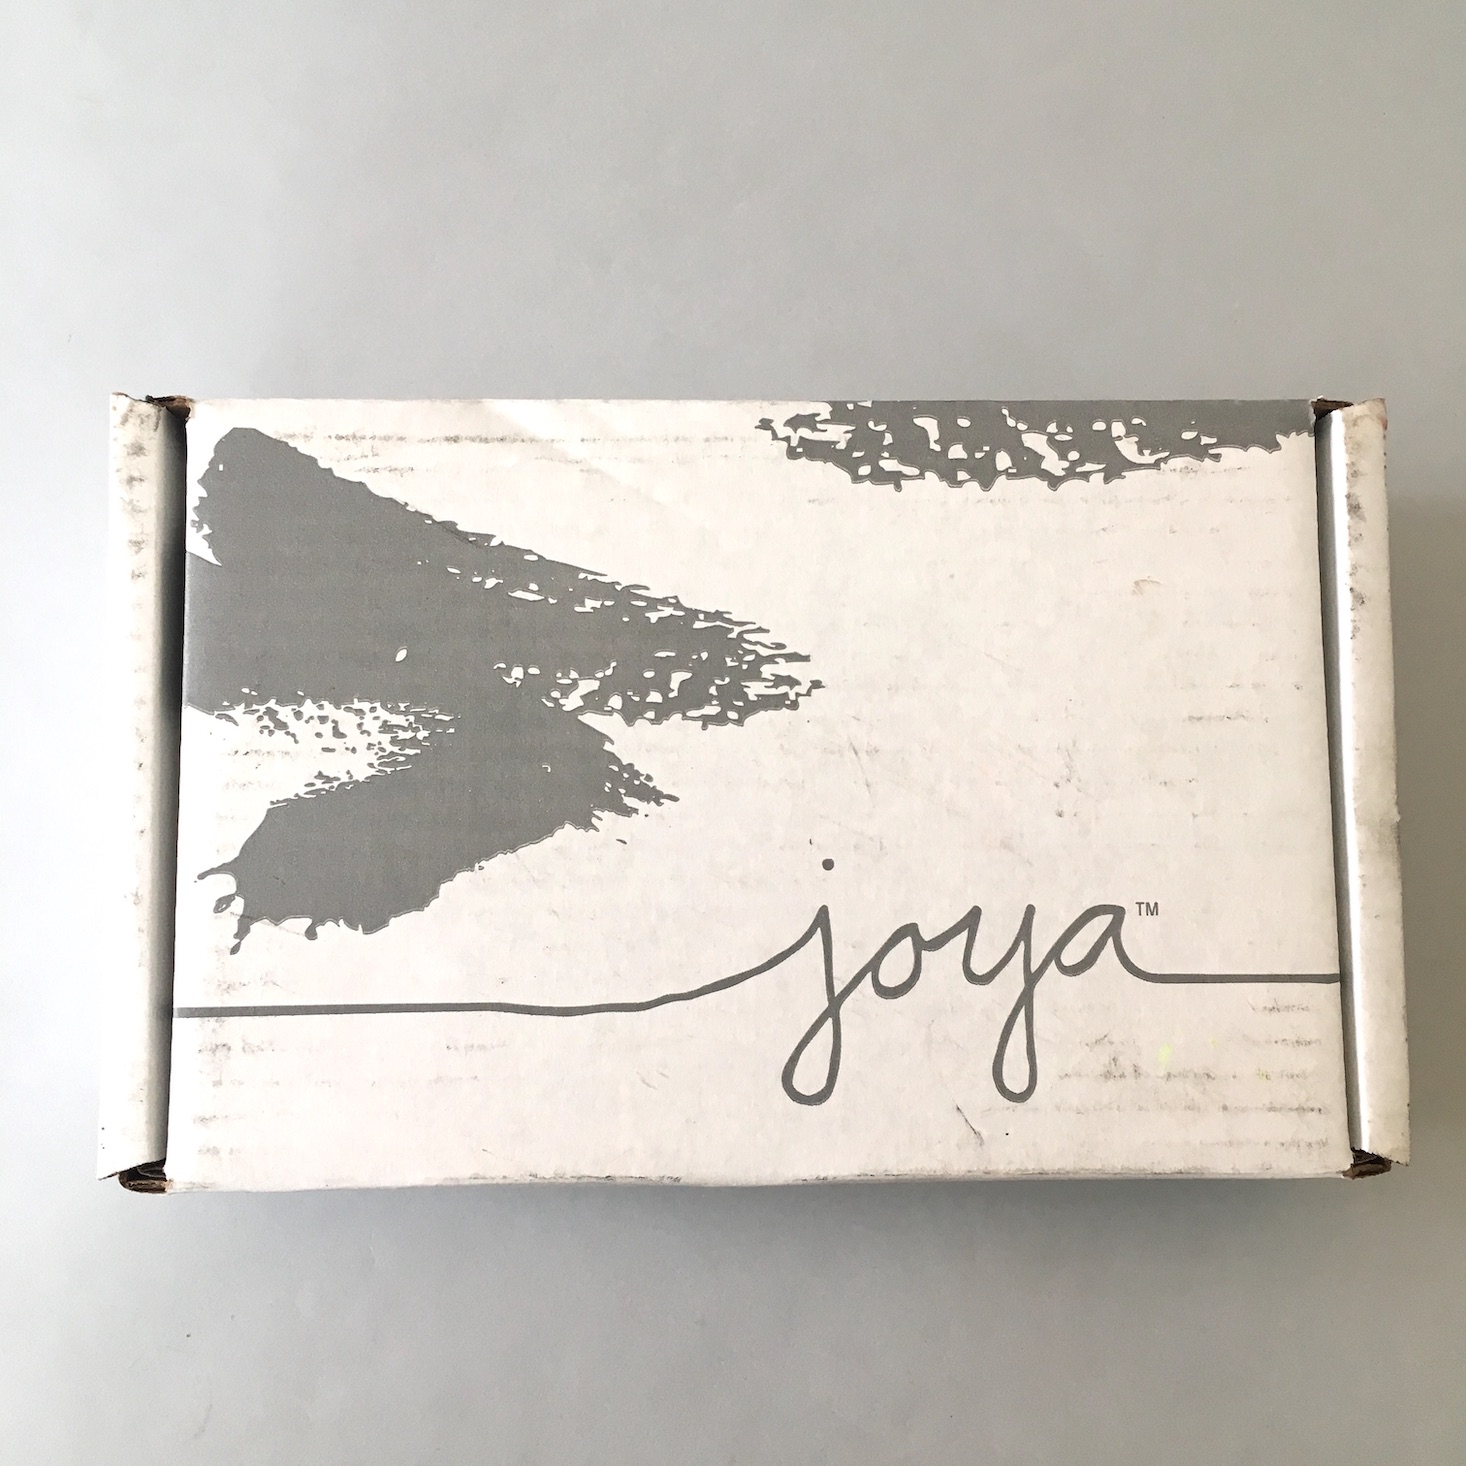 Collections by Joya Jewelry Subscription Review – April 2019